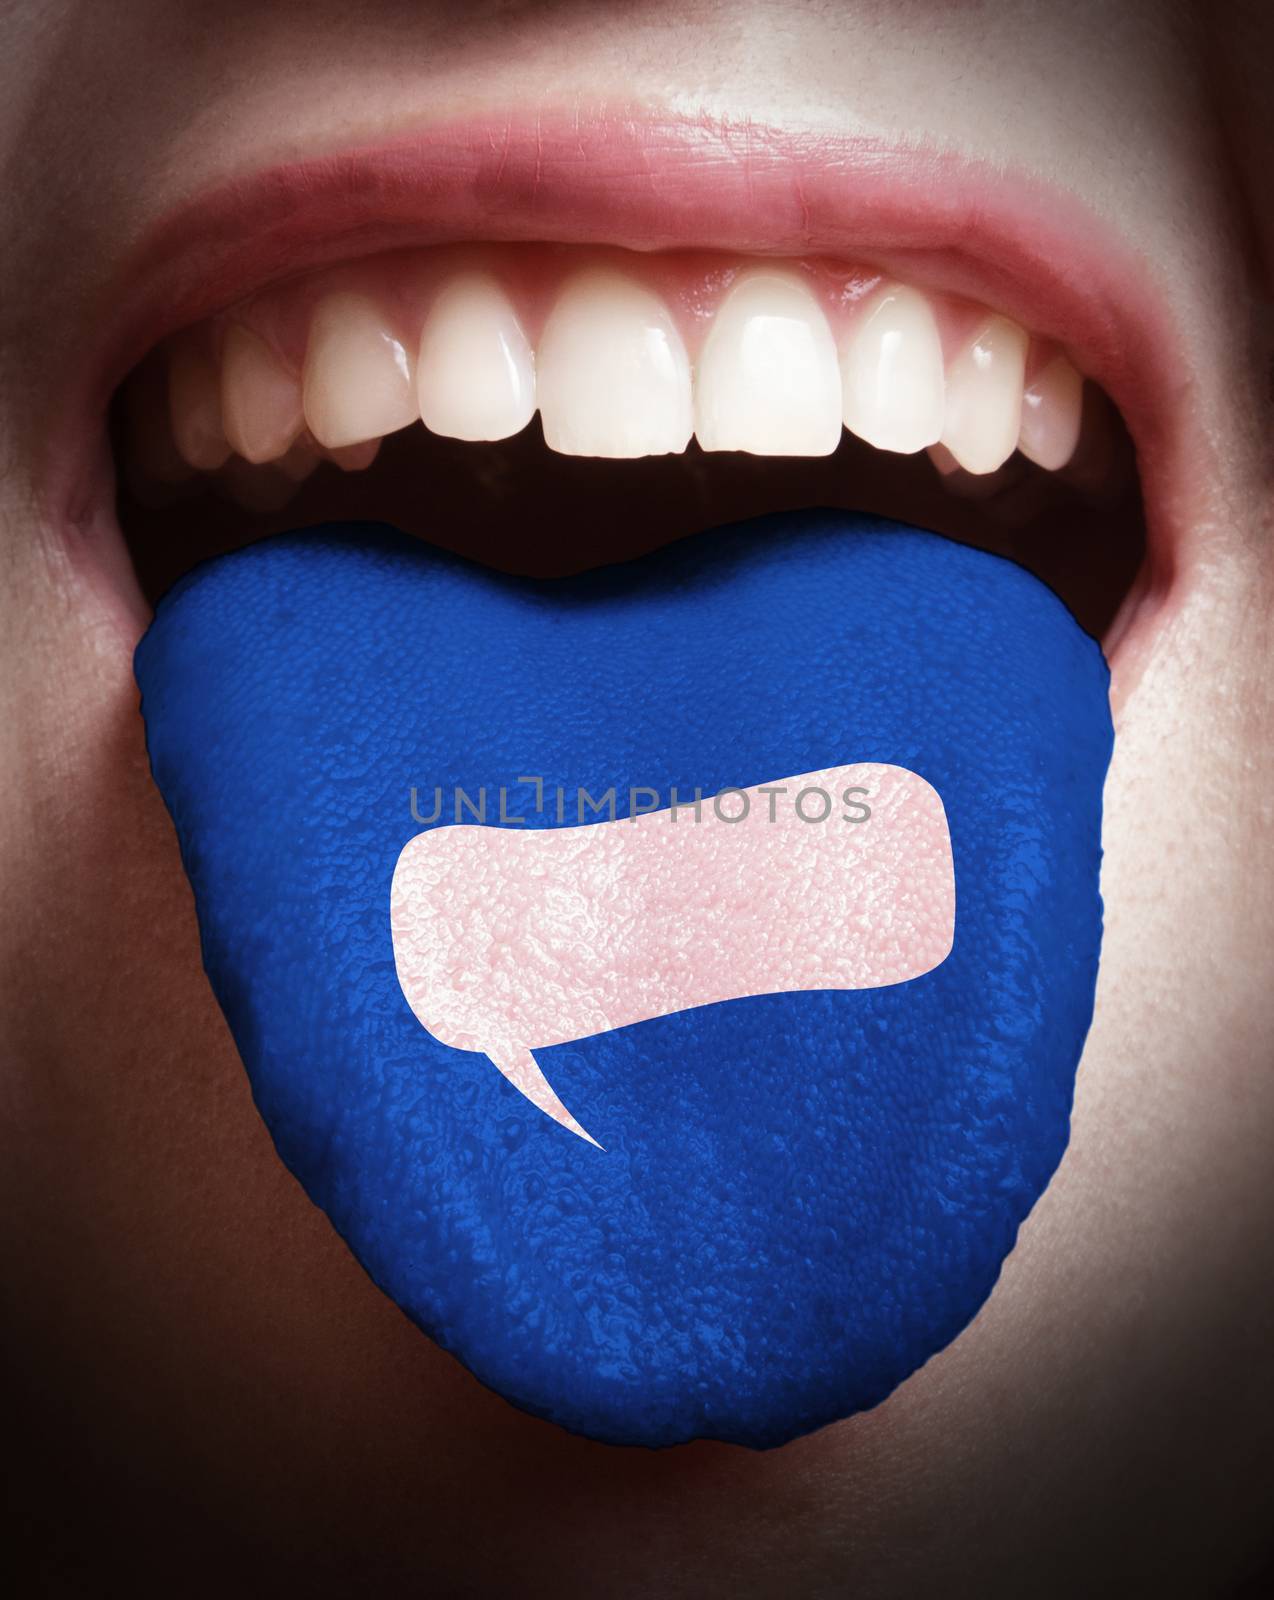 woman with open mouth spreading tongue colored in speech bubble  by everythingpossible